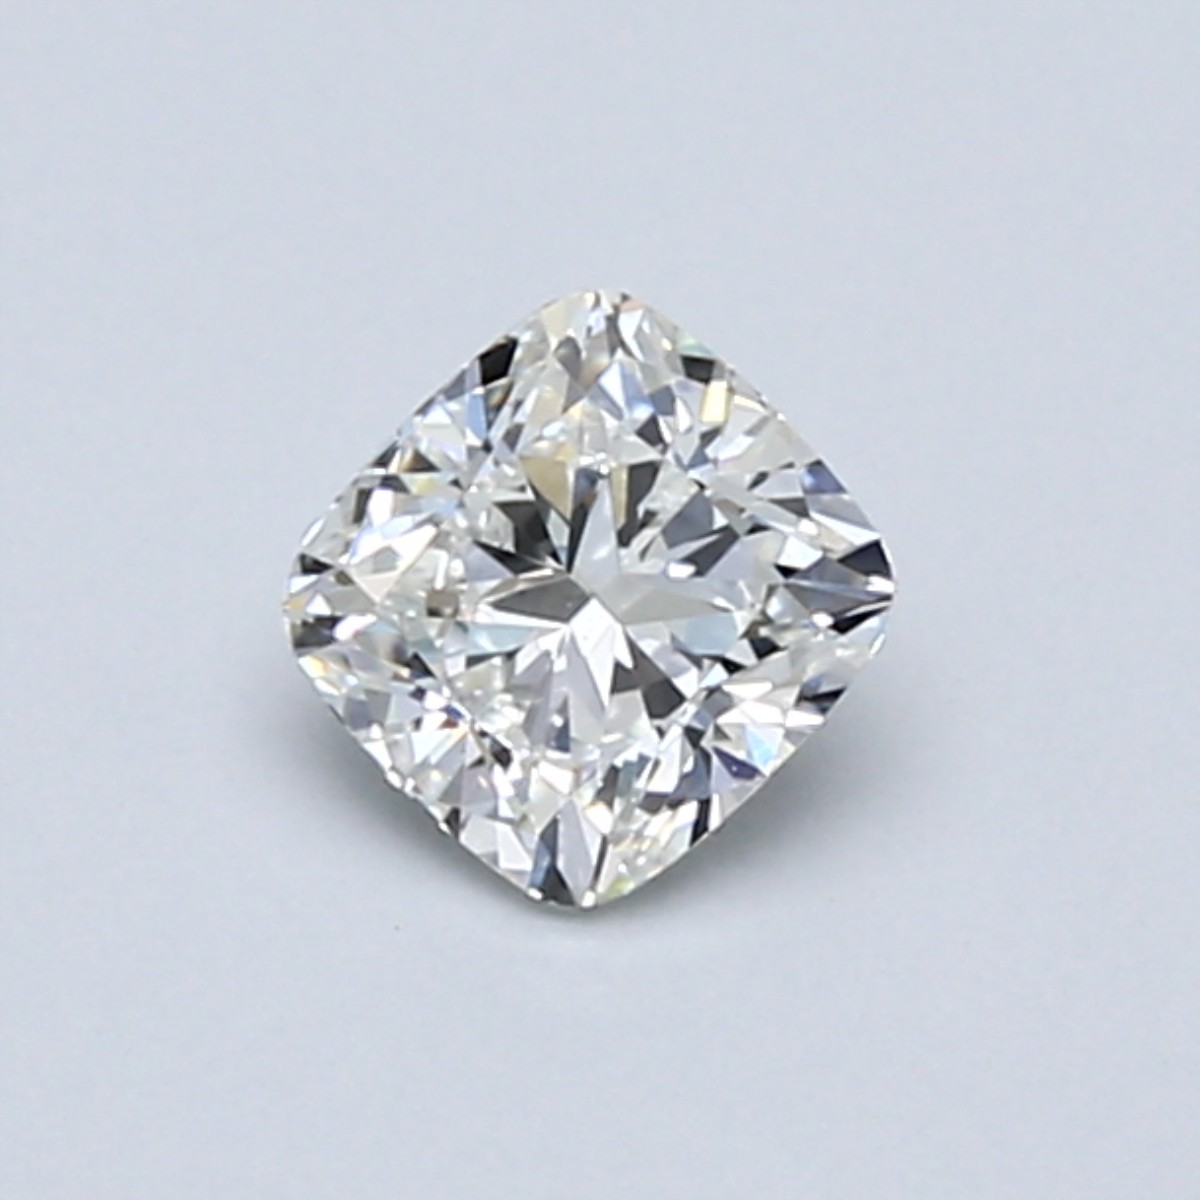 Cushion 0.53 Carat H Color VS2 Clarity For Sale